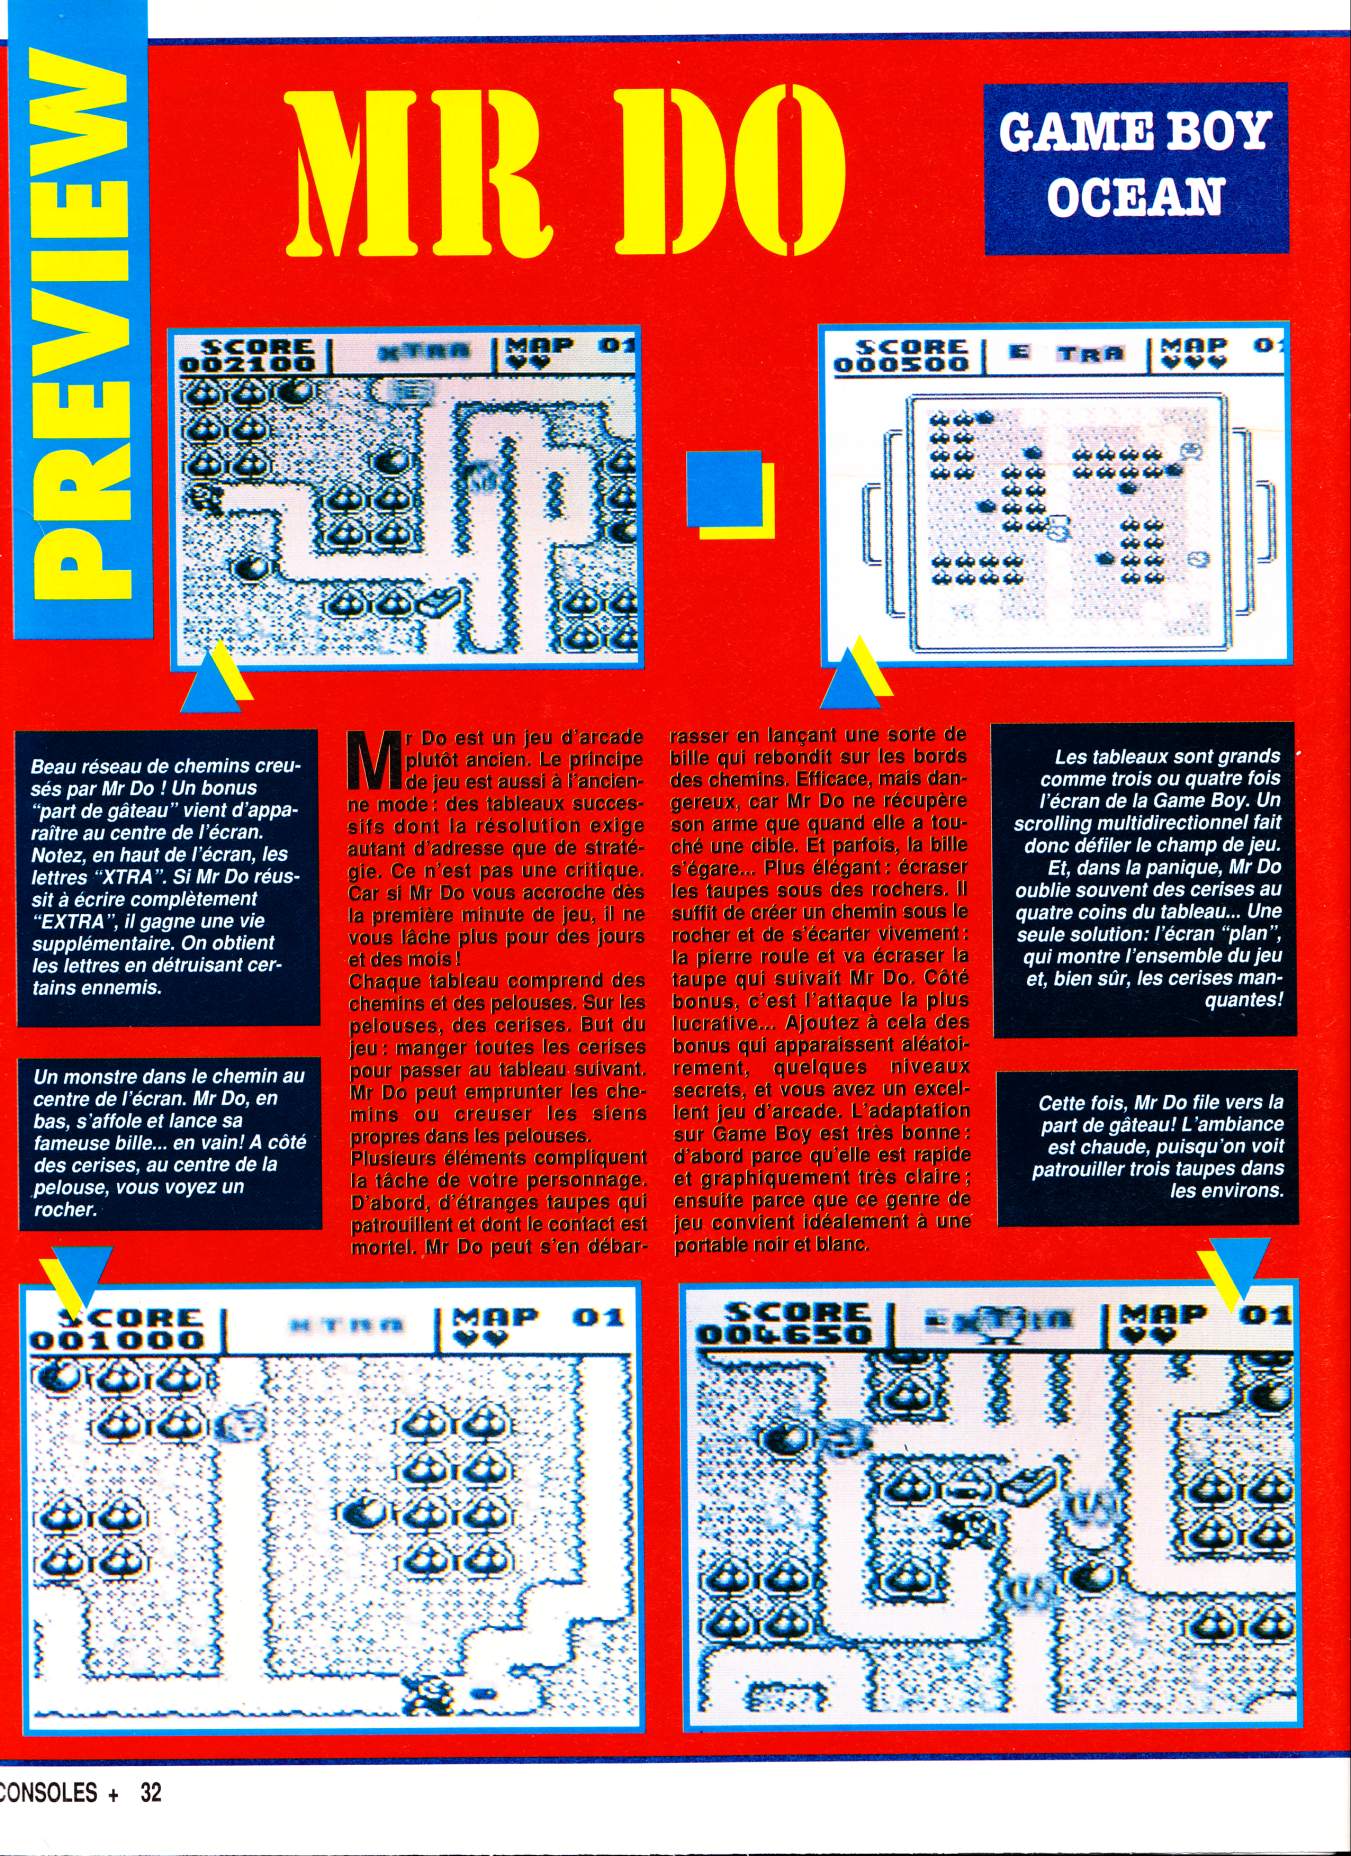 tests//989/Consoles + 008 - Page 032 (1992-04).jpg